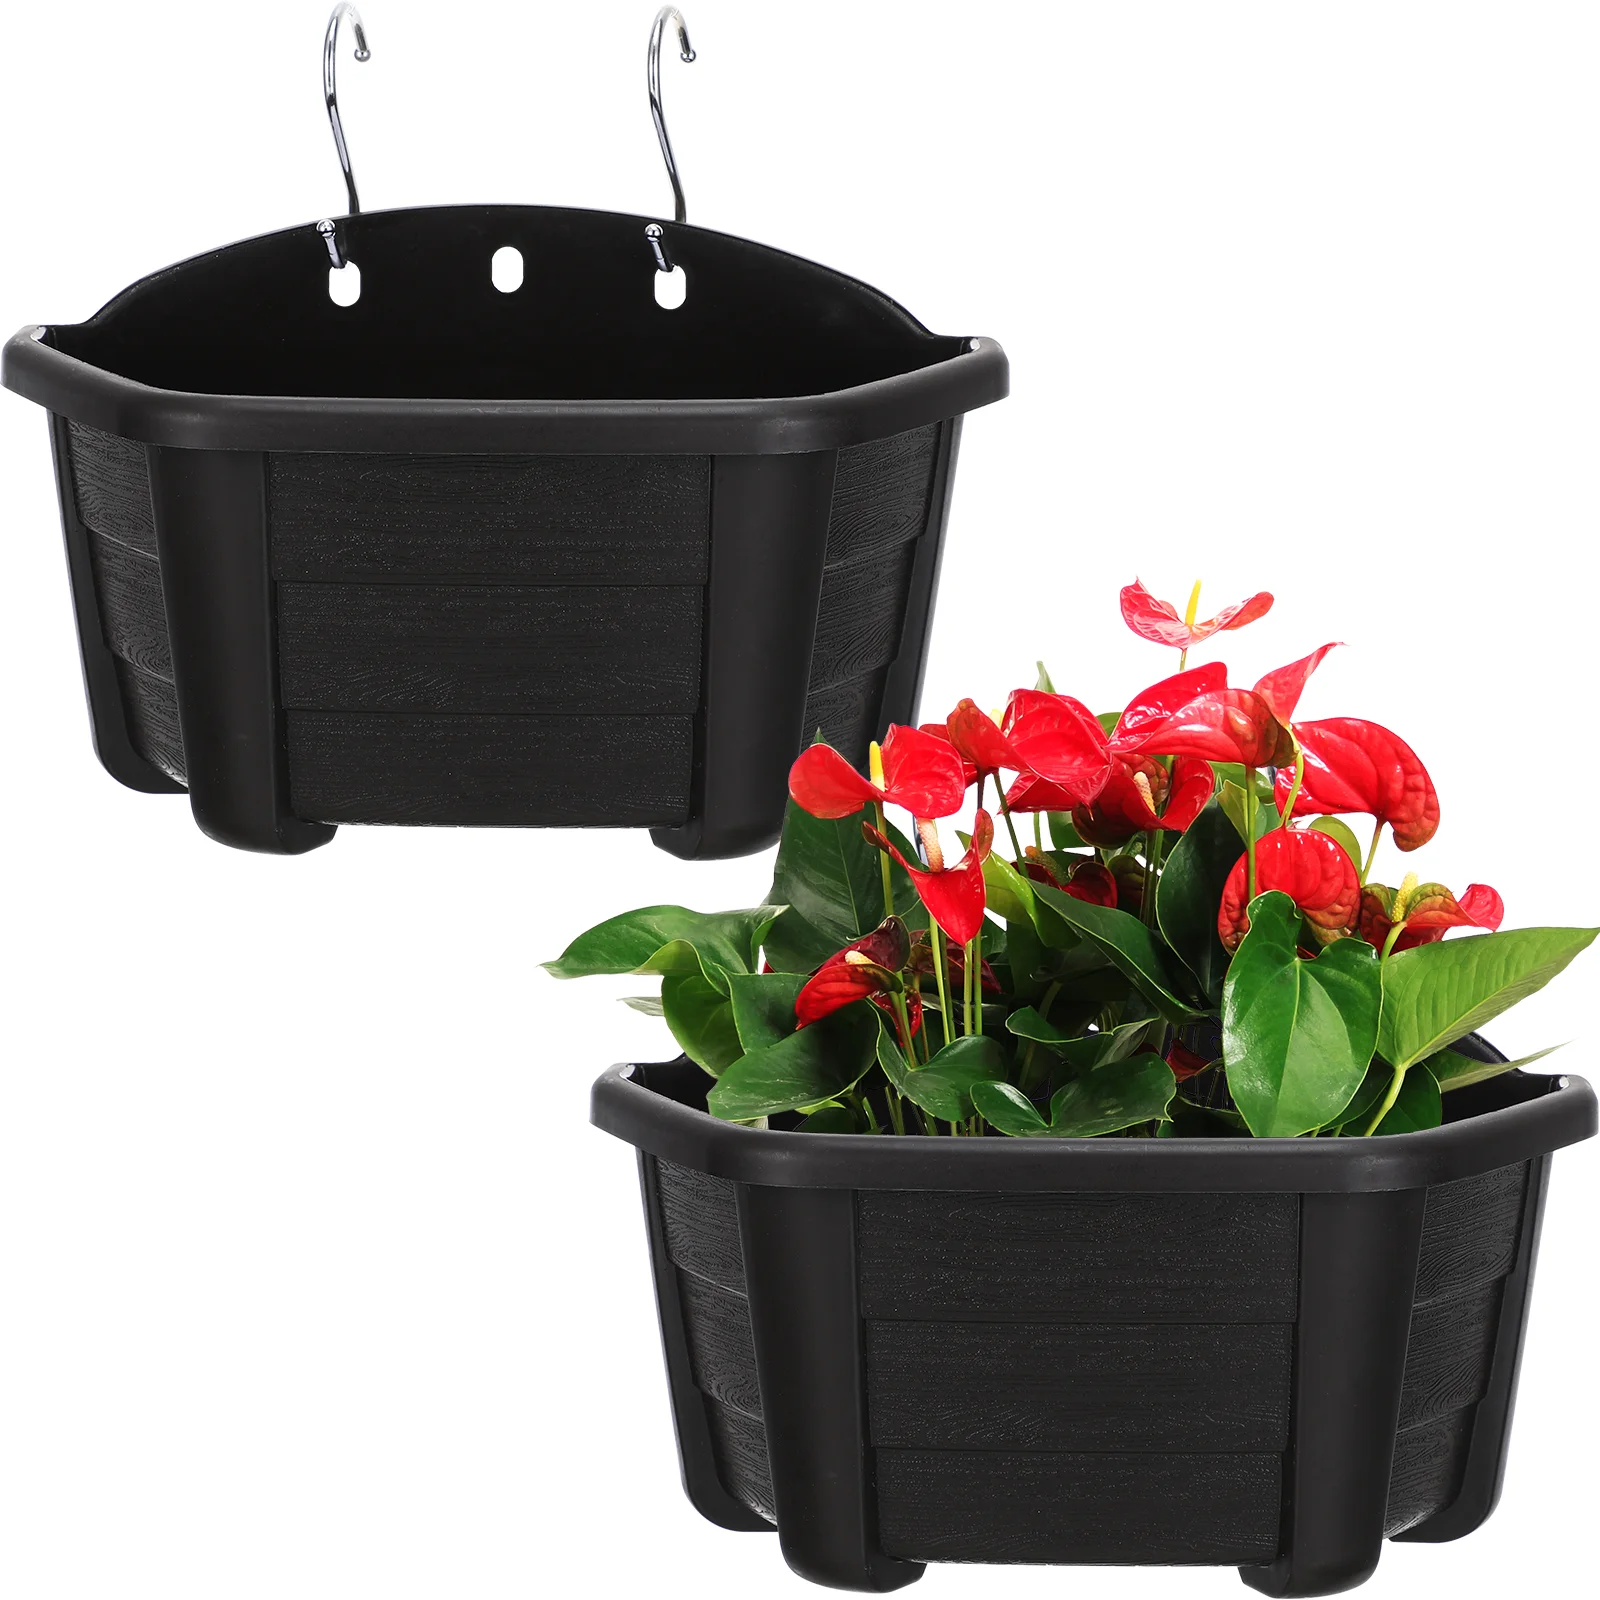 

2 Pcs Wall Mounted Semicircle Flower Pot Hanging Planter Outdoor Fence Planters Plants Indoor Buckets Pots The Flowerpots